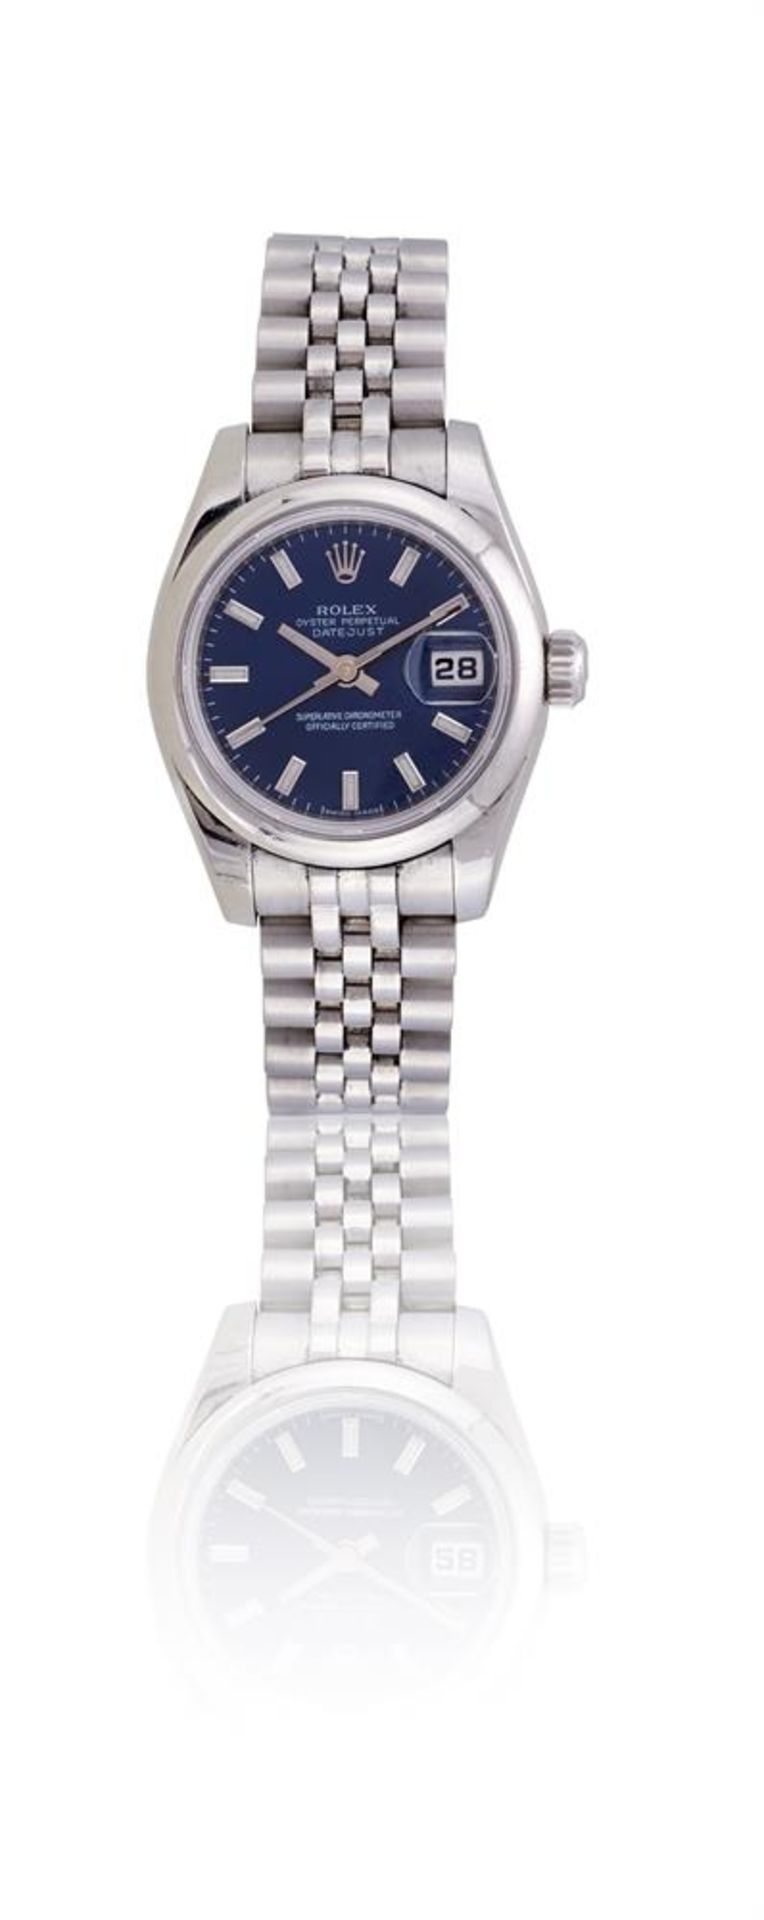 ROLEX, OYSTER PERPETUAL DATEJUST, REF. 179160